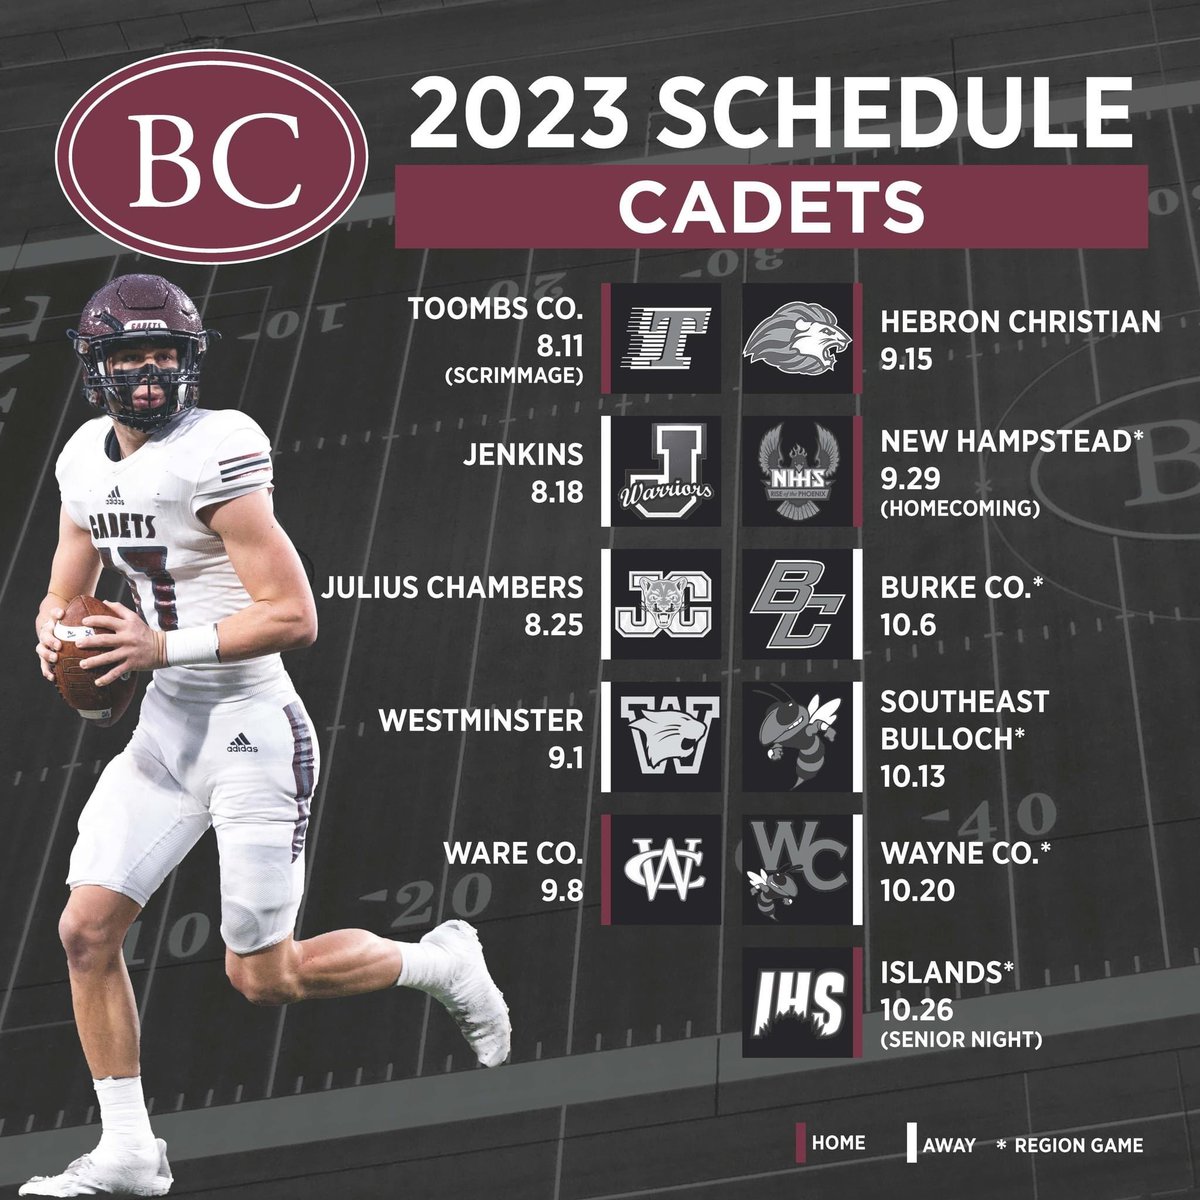 REVISED 2023 BC FOOTBALL SCHEDULE: Instead of playing host to Gadsden (Fla.) on Aug. 25, Benedictine Military School will be in Charlotte, N.C., to play Julius Chambers. #thebc400 #NextLevelBC #Savannah